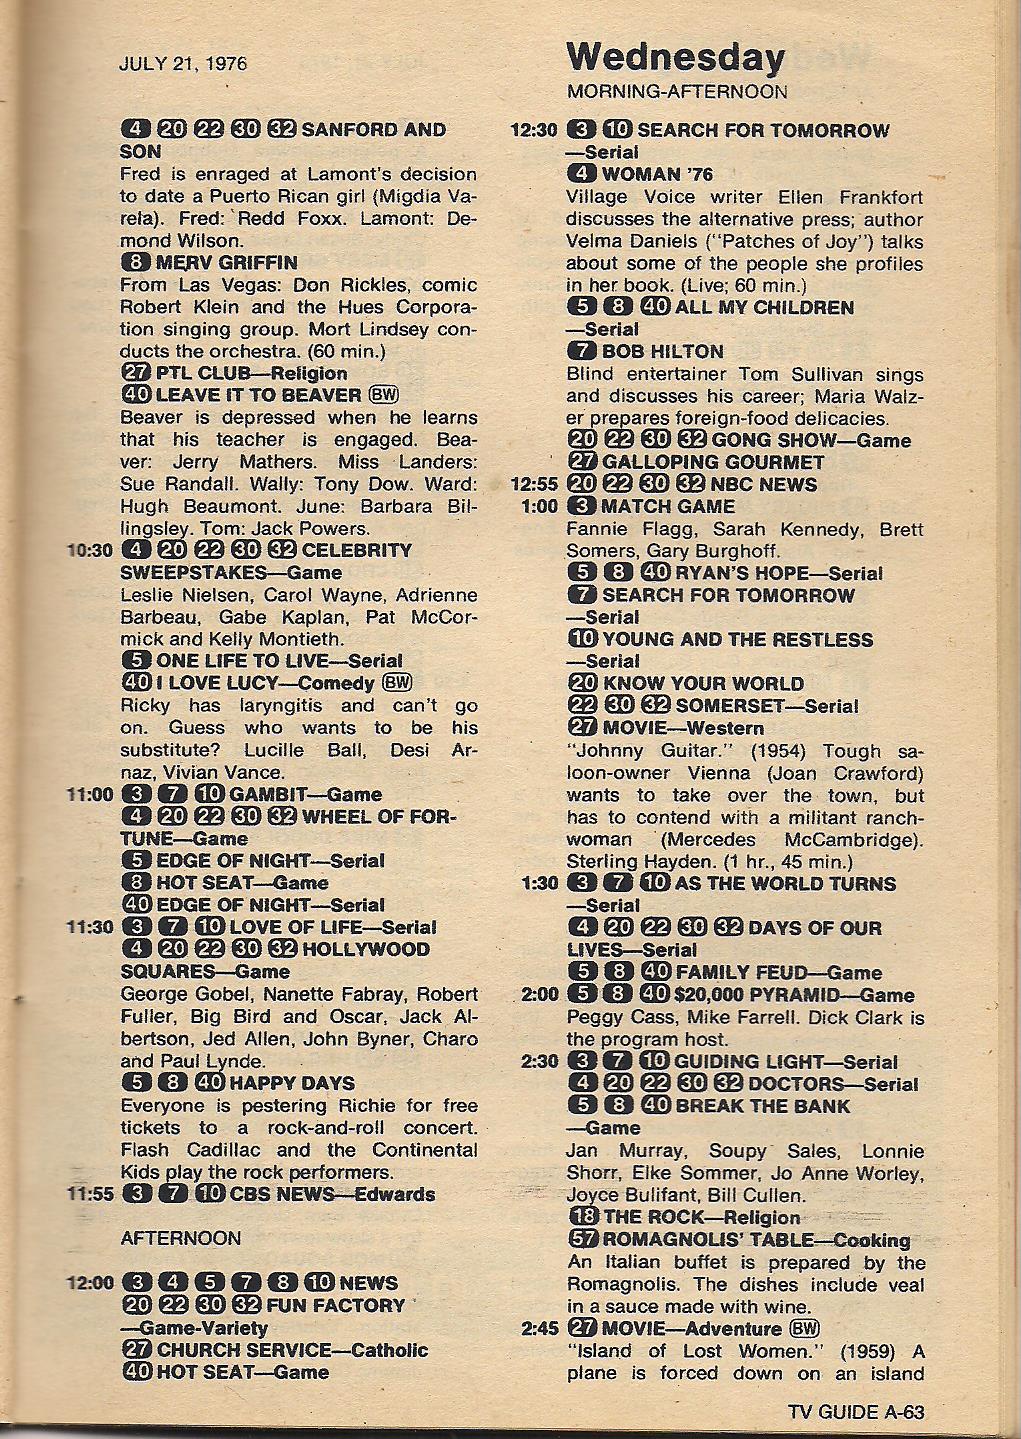 another old movie blog: tv guide - 1976 - the search for classic films